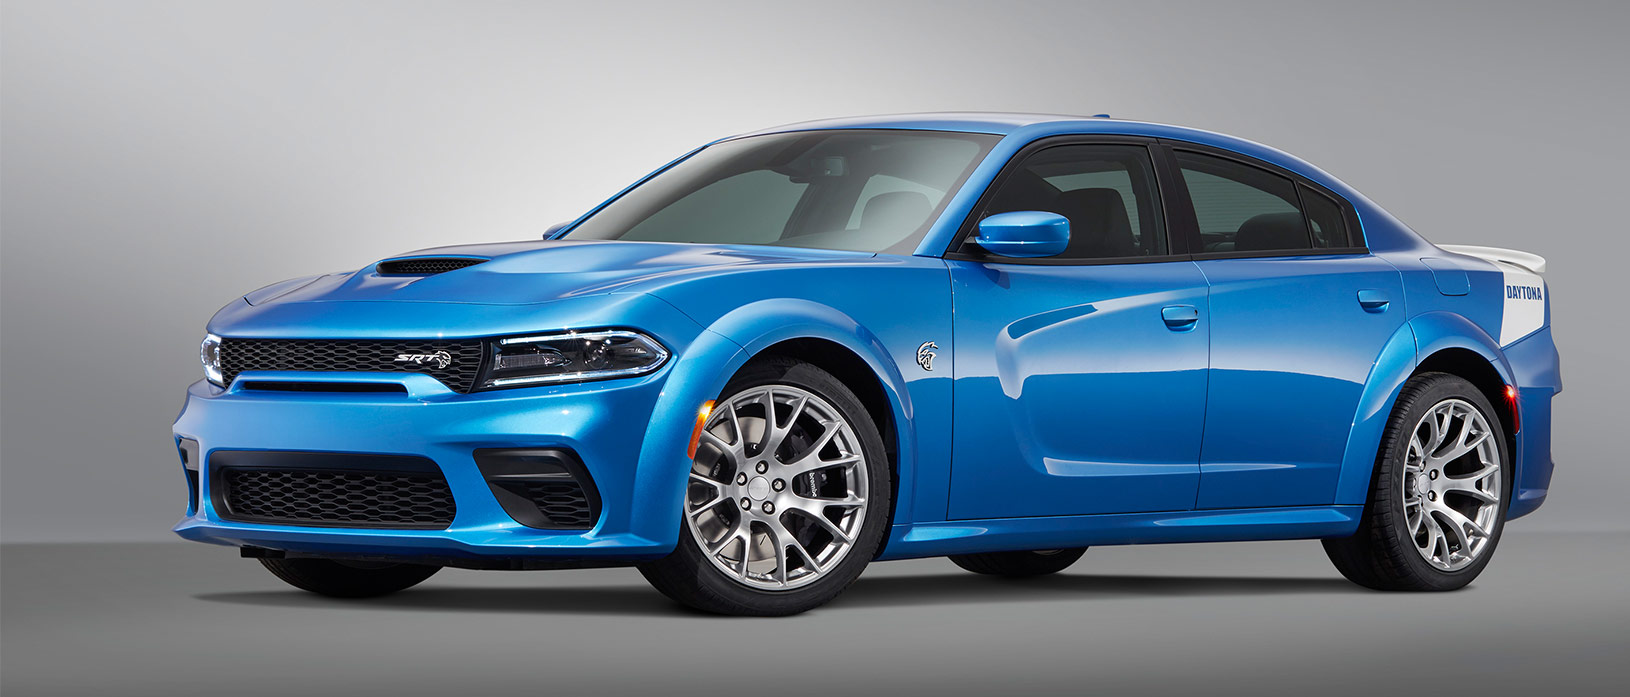 Dodge Debuts Limited-production 717-horsepower Daytona 50th Anniversary Edition on New 2020 Dodge Charger SRT<sup>®</sup> Hellcat Widebody